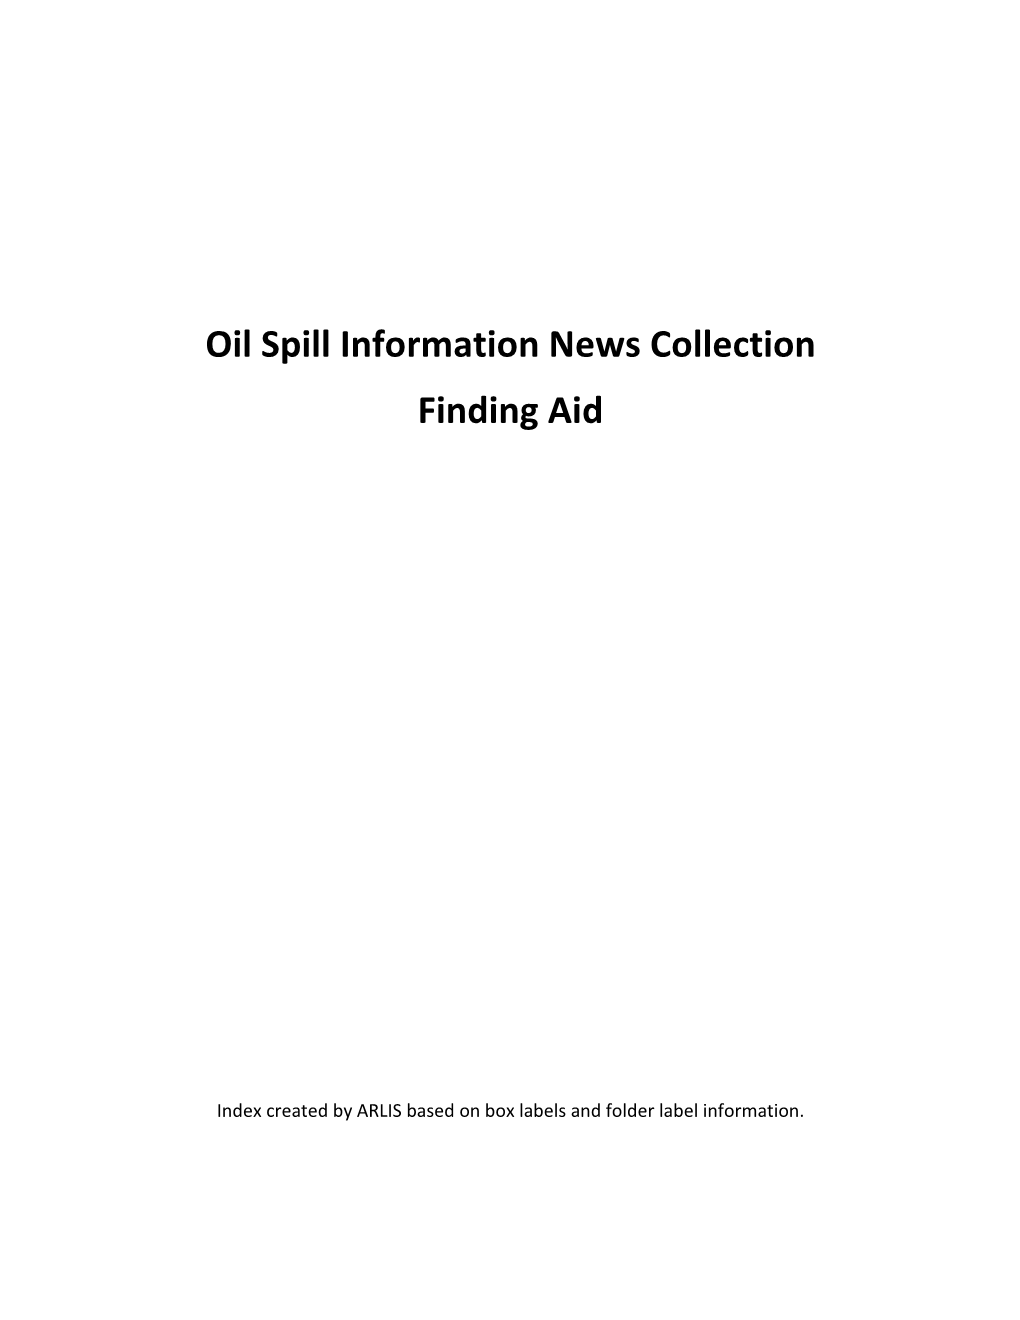 [Oil Spill Information News Collection]